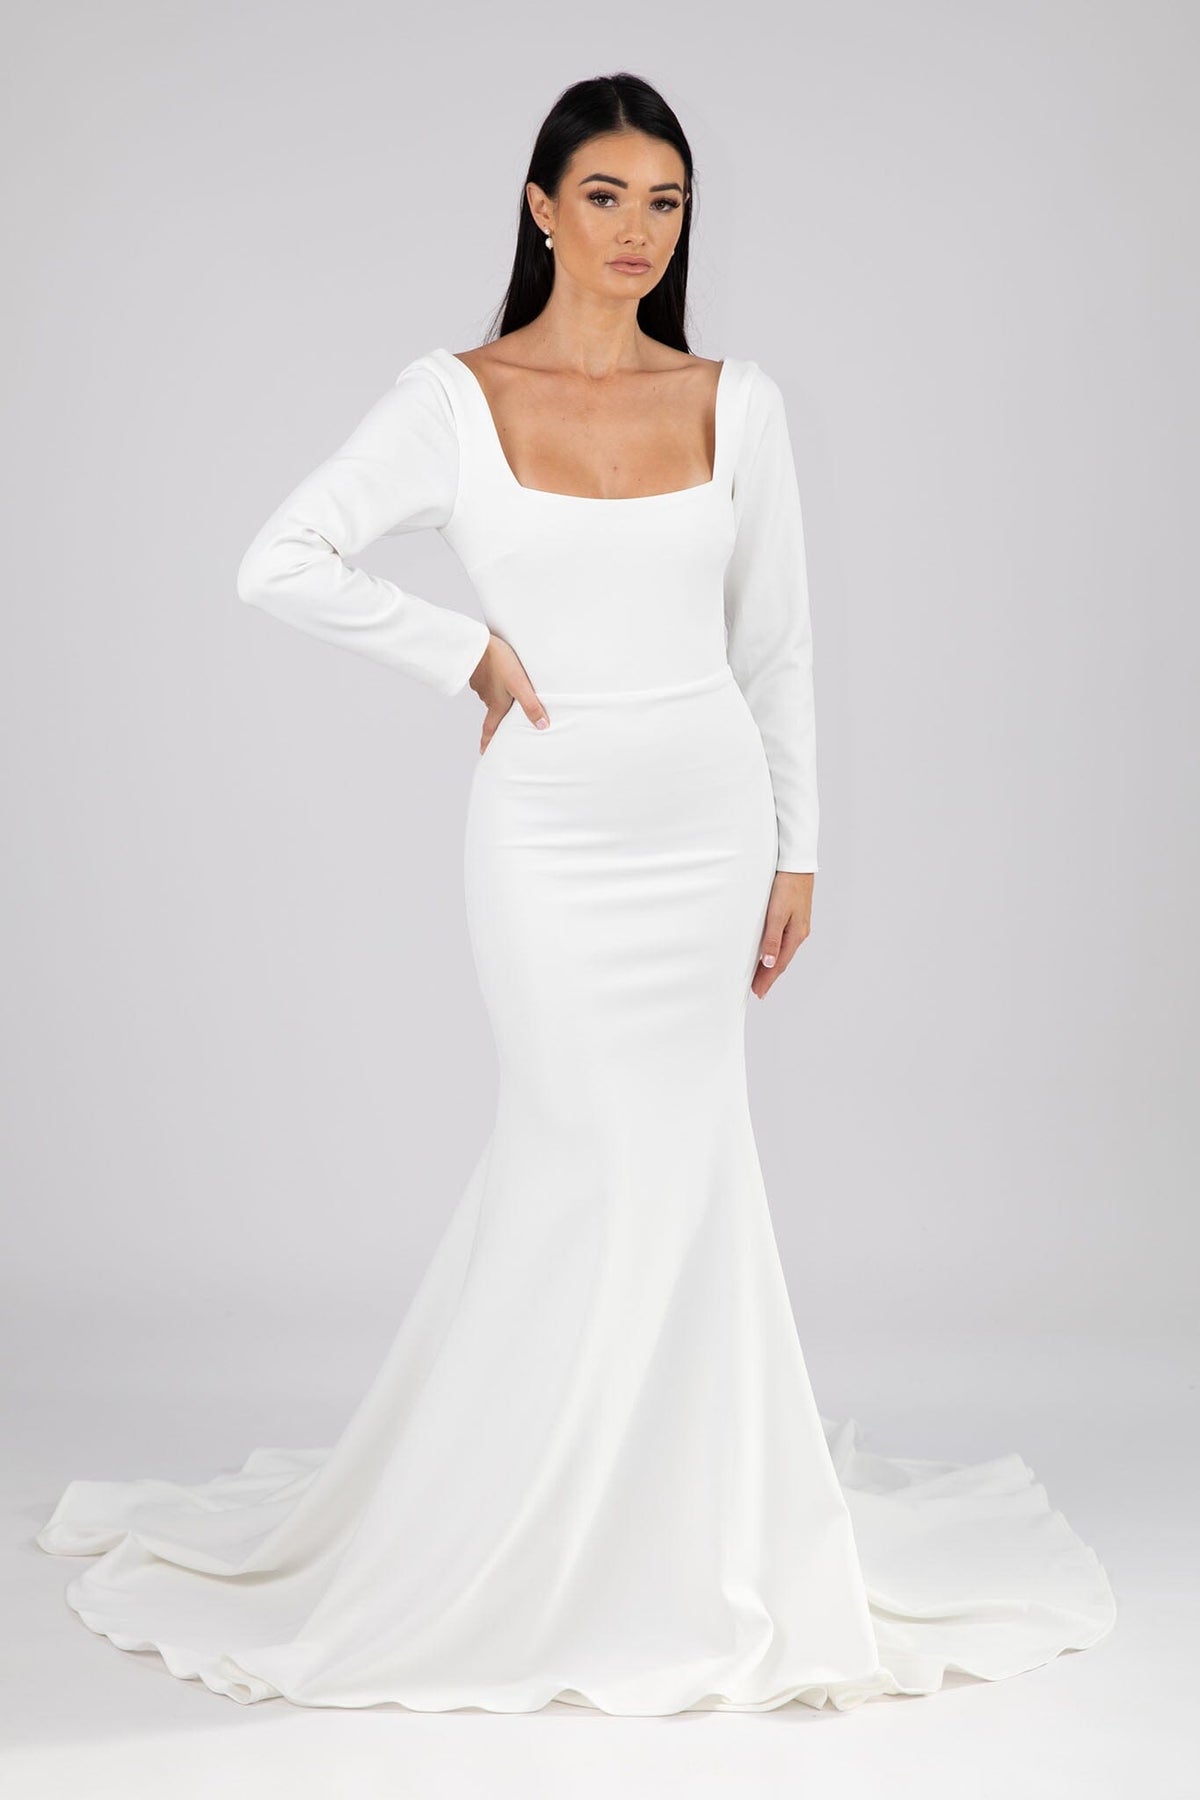 Ivory White Fit and Flare Wedding Gown with Square Neckline, Long Sleeves, Open Low Square Back Design and Sweep Train